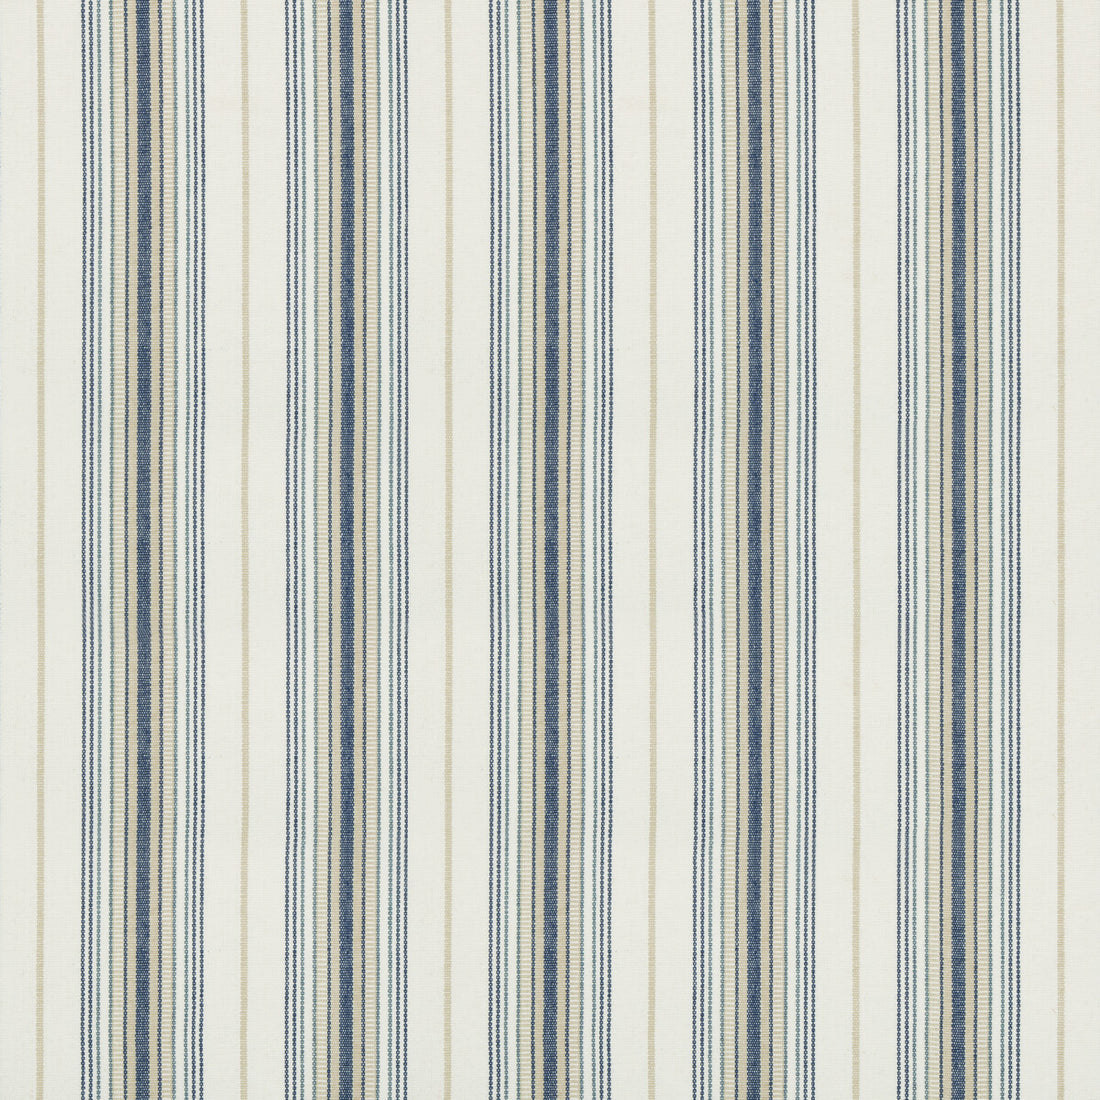 Cassis Stripe fabric in marina color - pattern 2018147.150.0 - by Lee Jofa in the Suzanne Kasler The Riviera collection